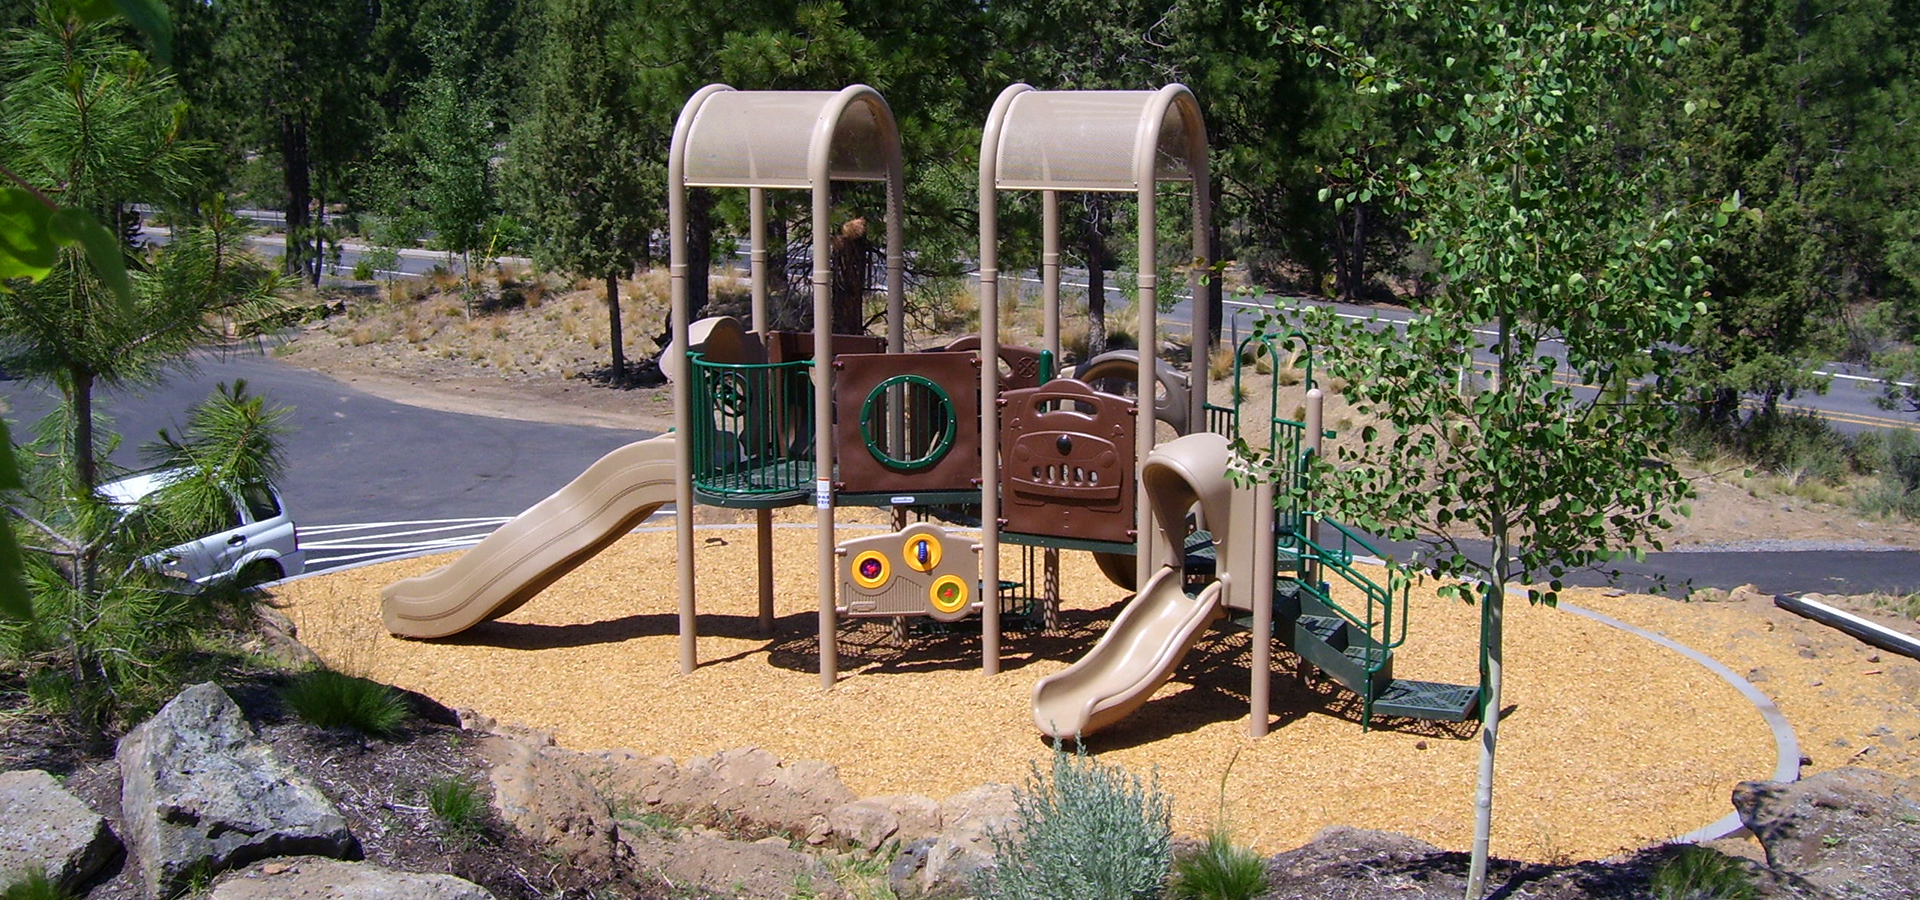 The play structure at Three Pines Park.